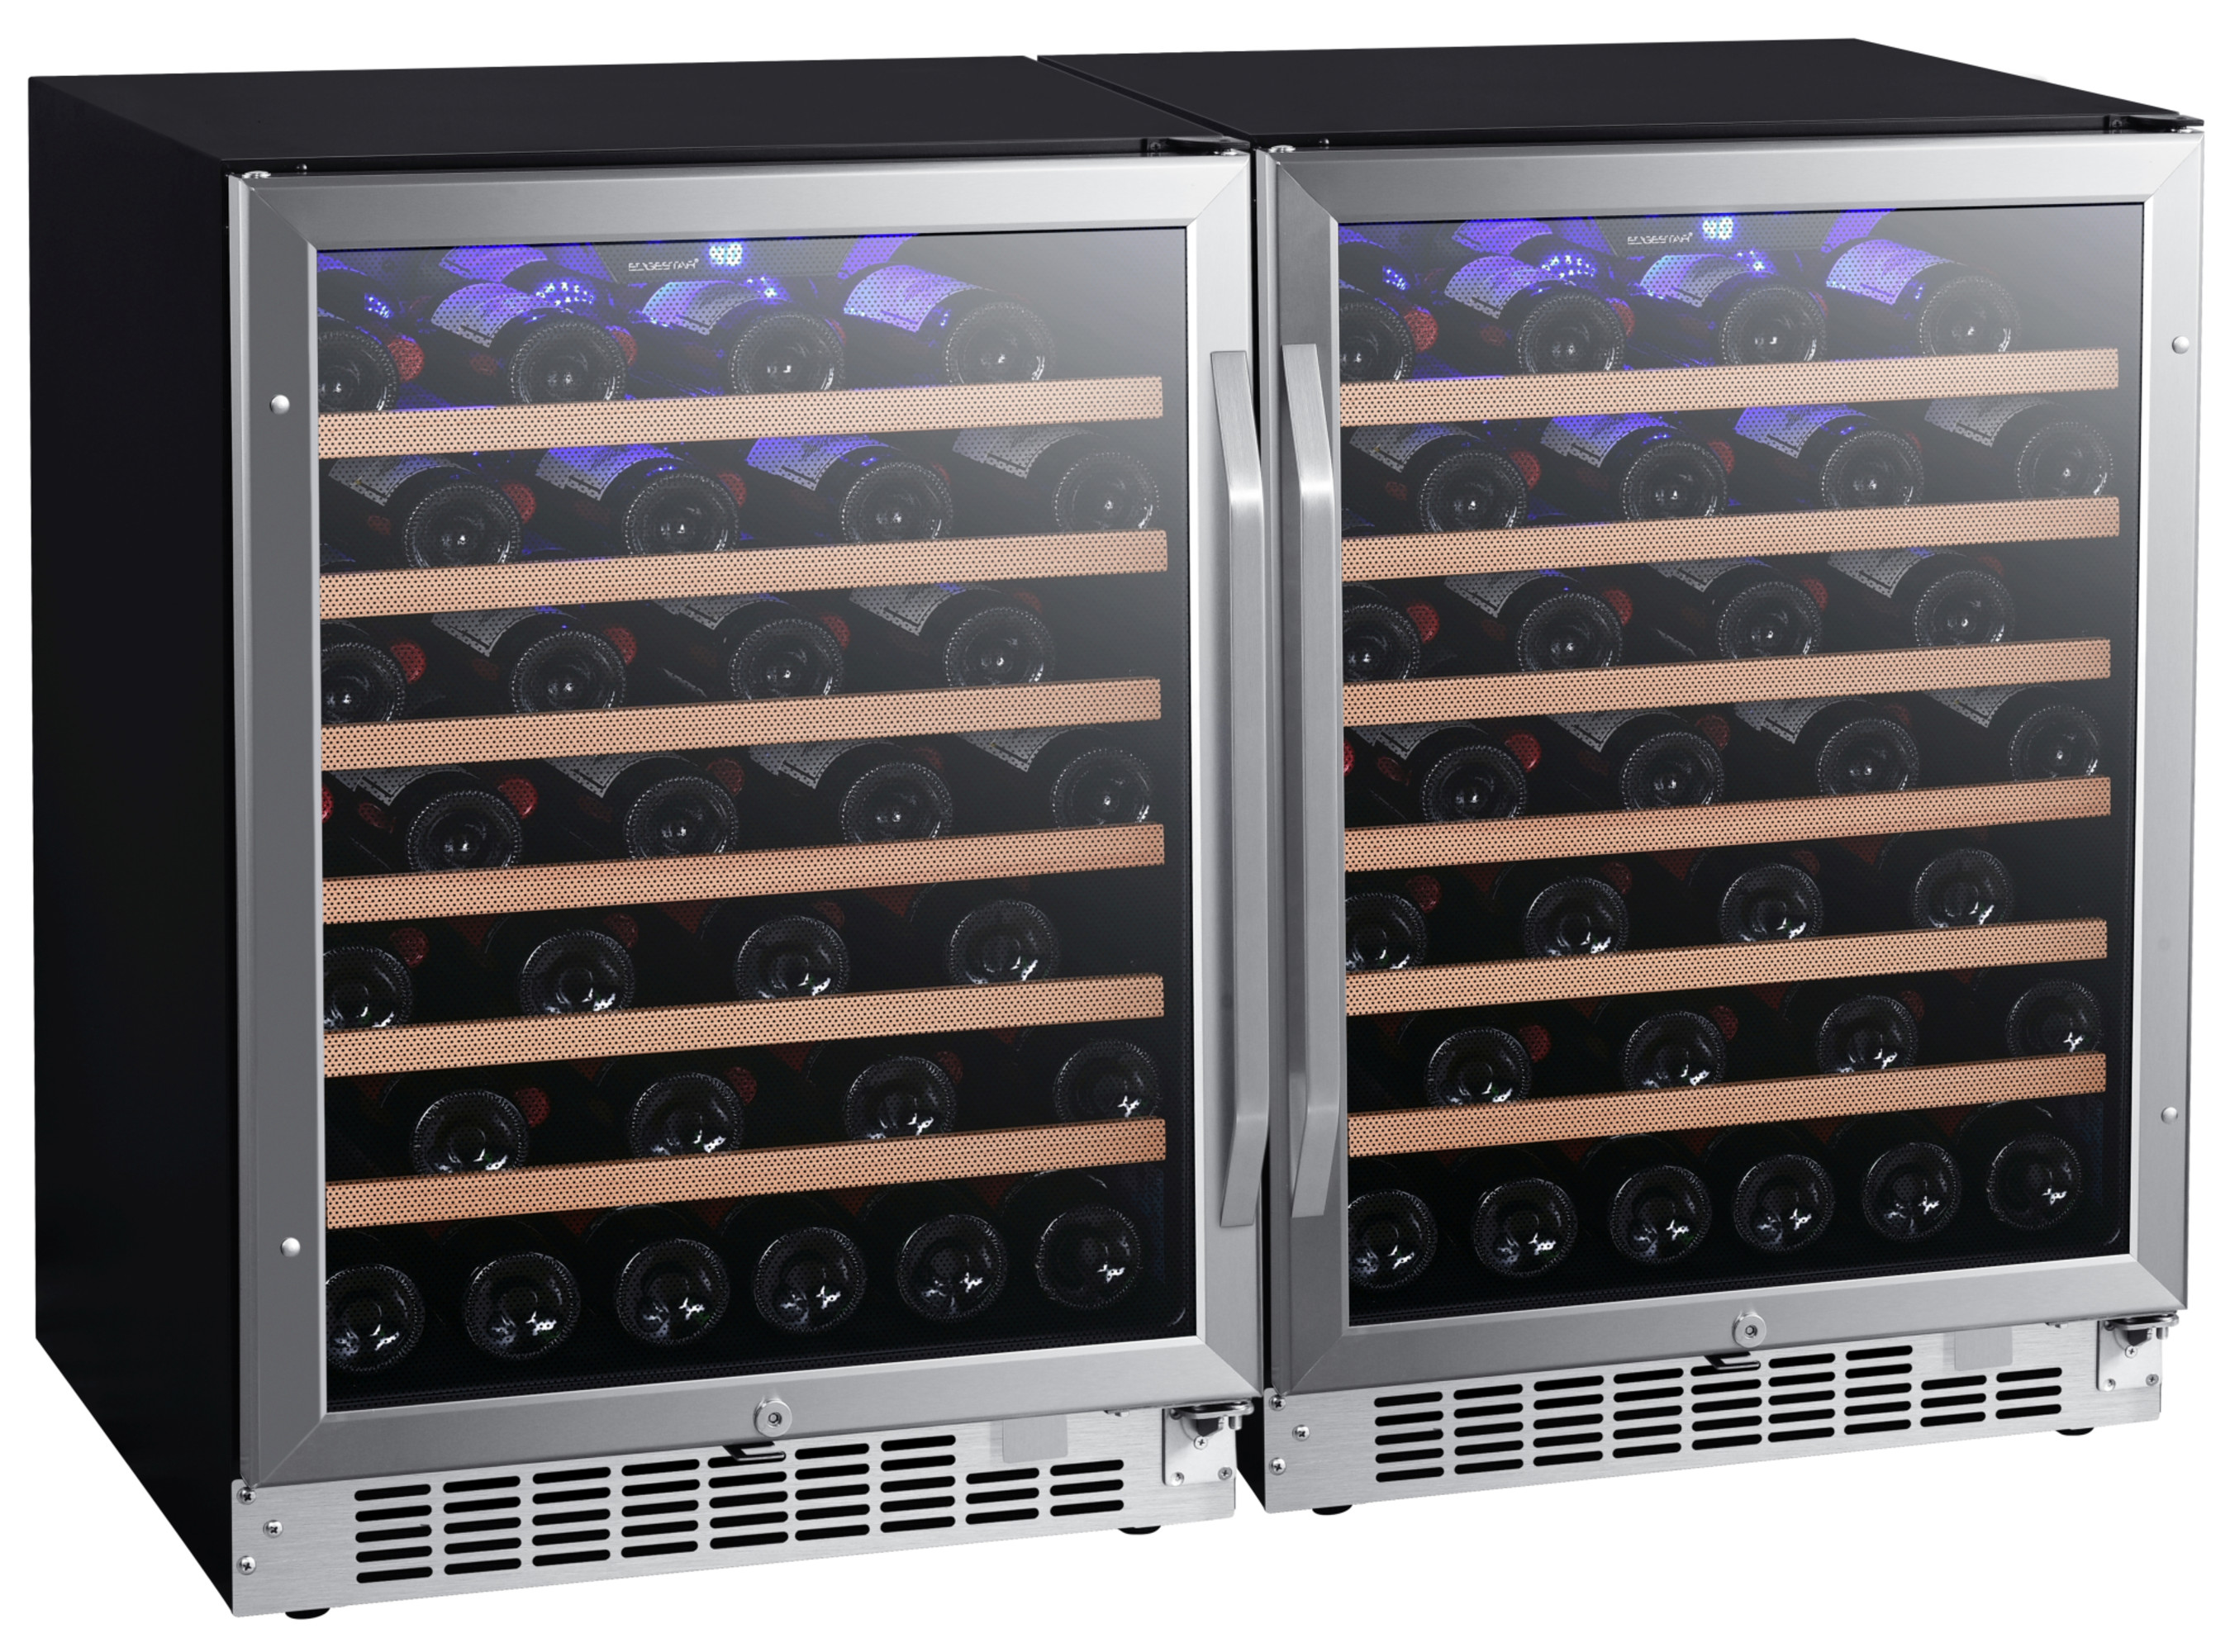 Edgestar Cwr532szdual 48" Wide 106 Bottle Built-In Side-By-Side Wine Cooler - Stainless - image 2 of 2